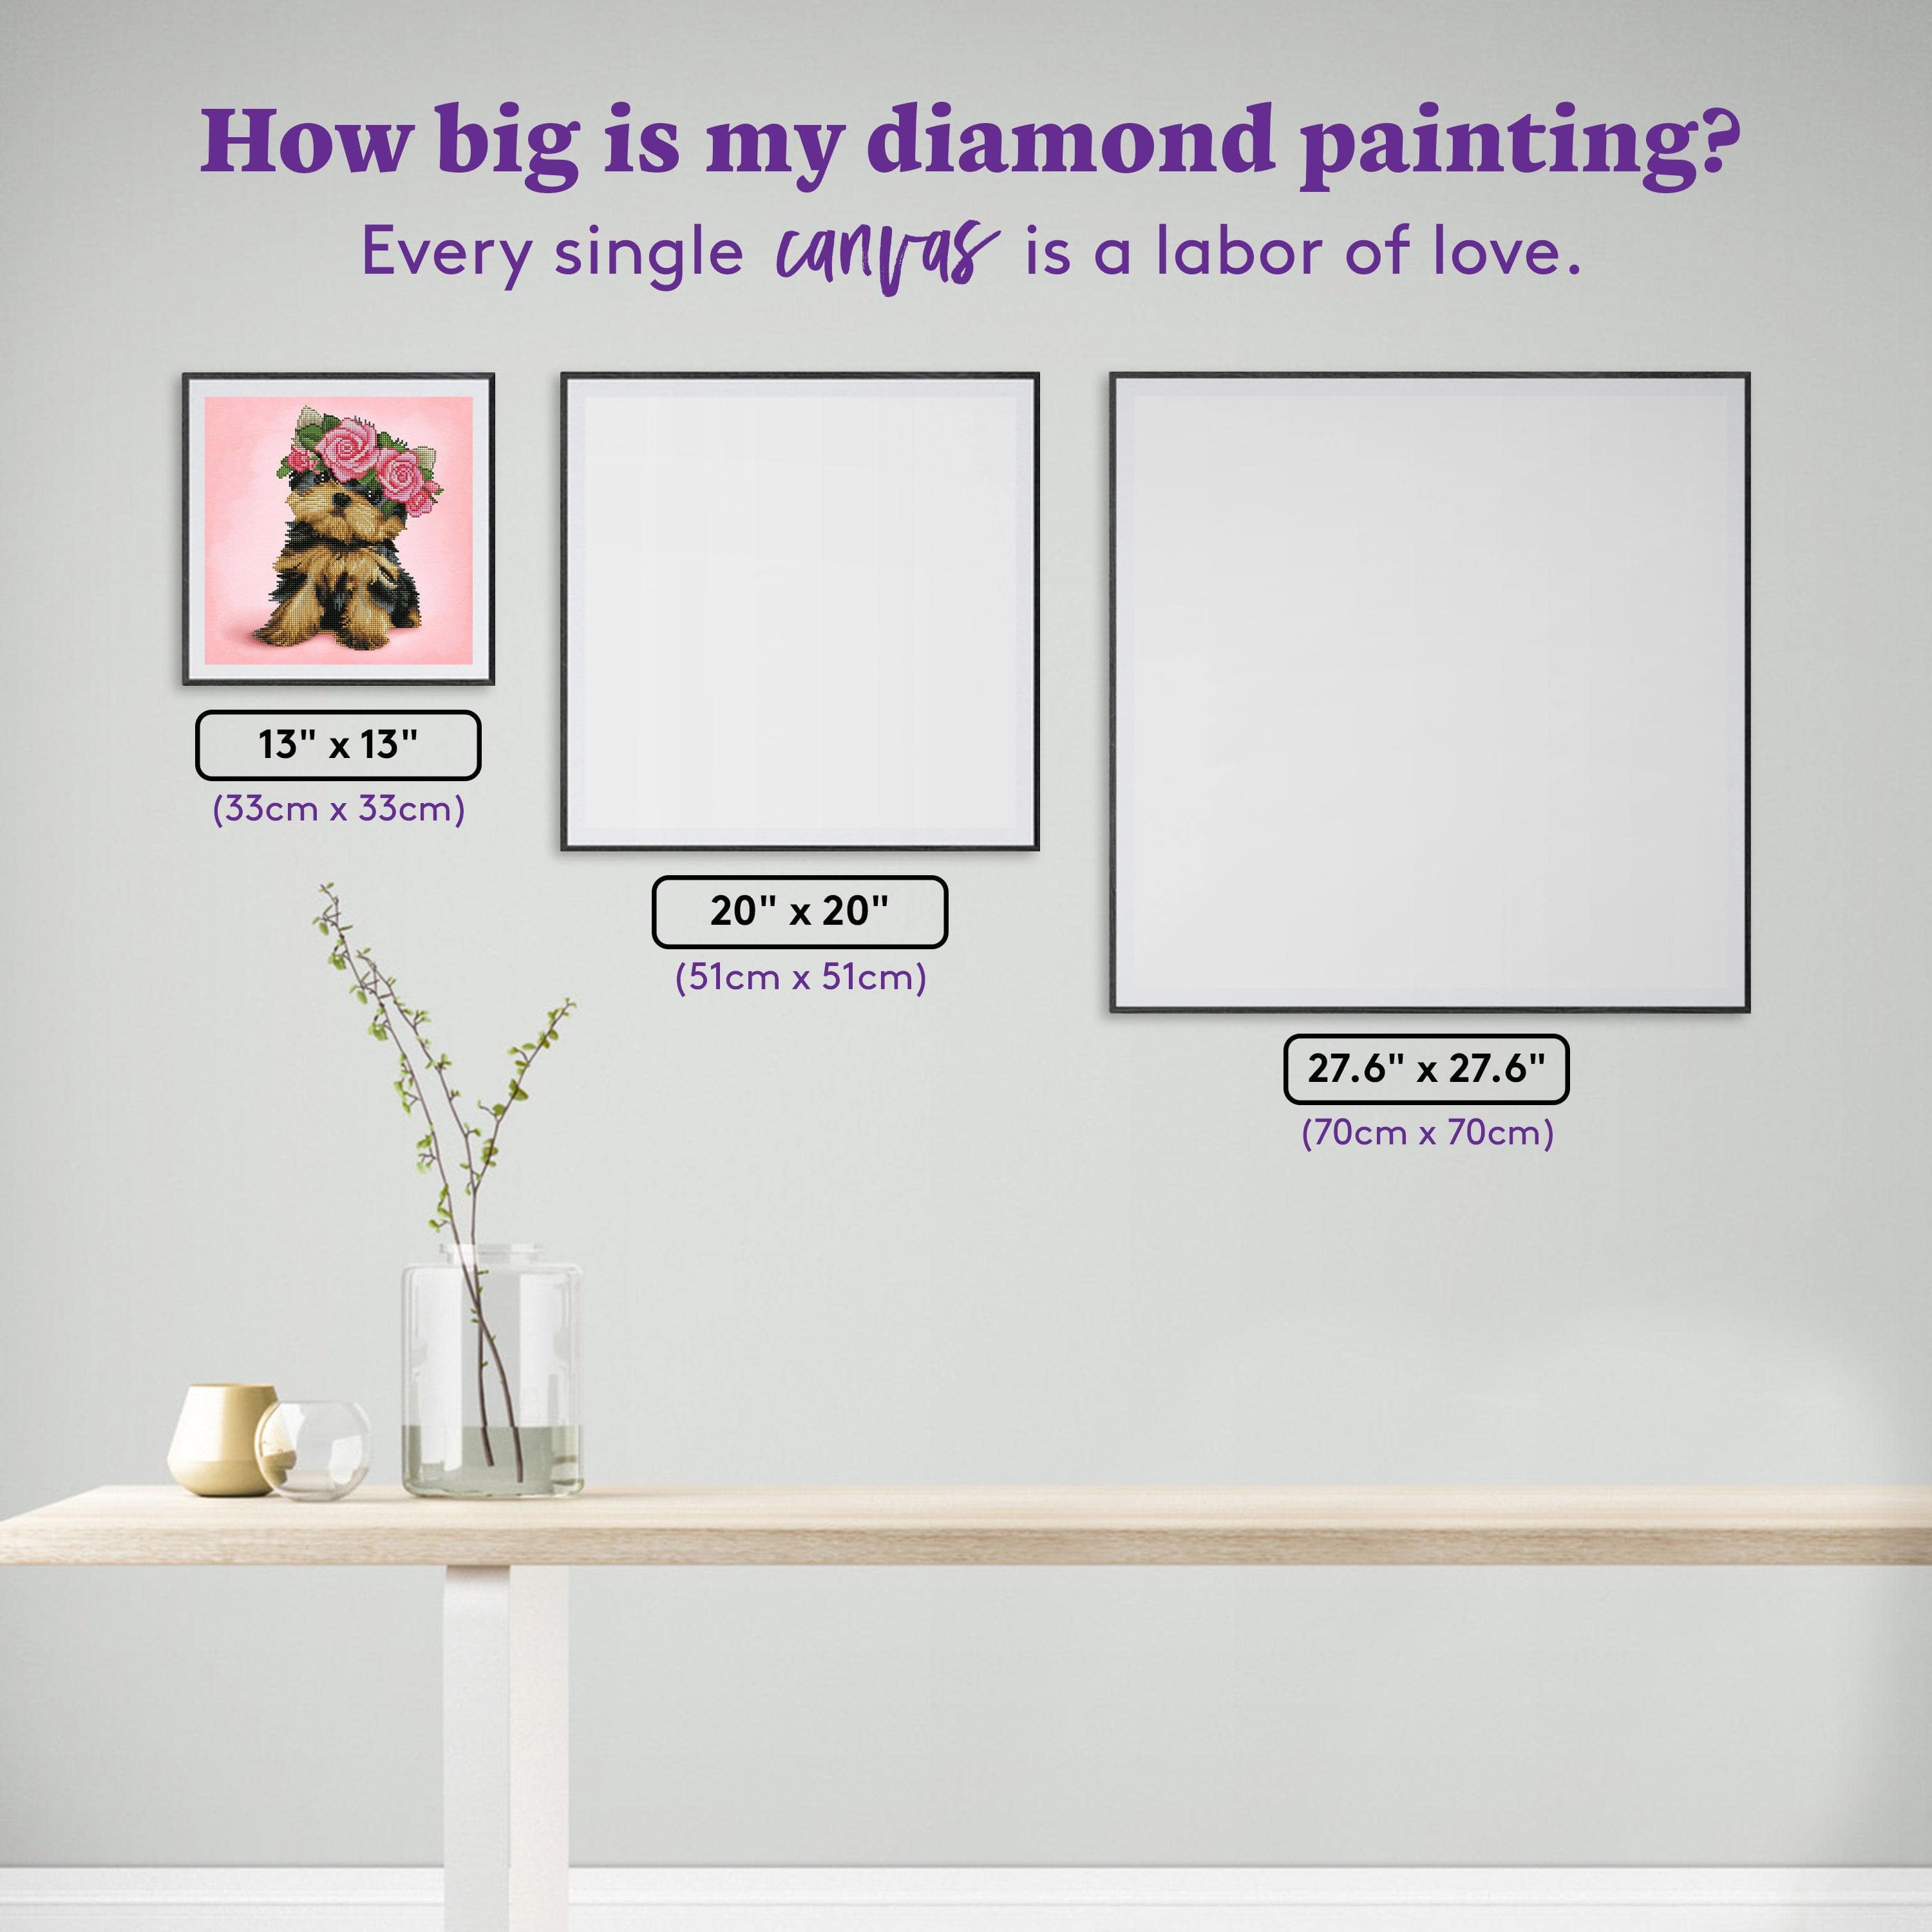 Candles & Roses Painting Kit – All Diamond Painting